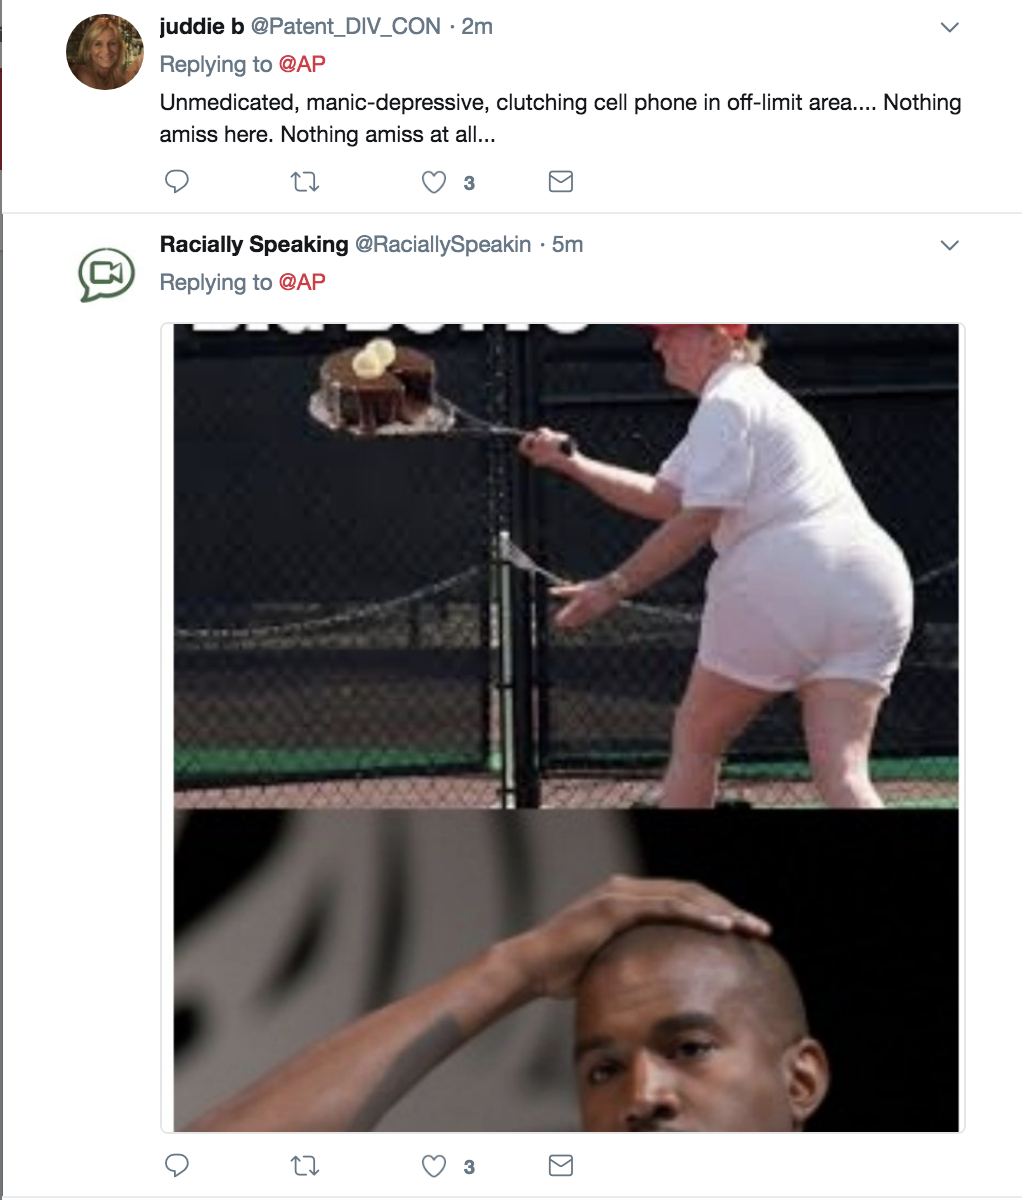 Screen-Shot-2018-10-11-at-1.37.47-PM Trump's Embarrassing Display With Kanye West Goes Viral Donald Trump Election 2020 Mental Illness Politics Top Stories 